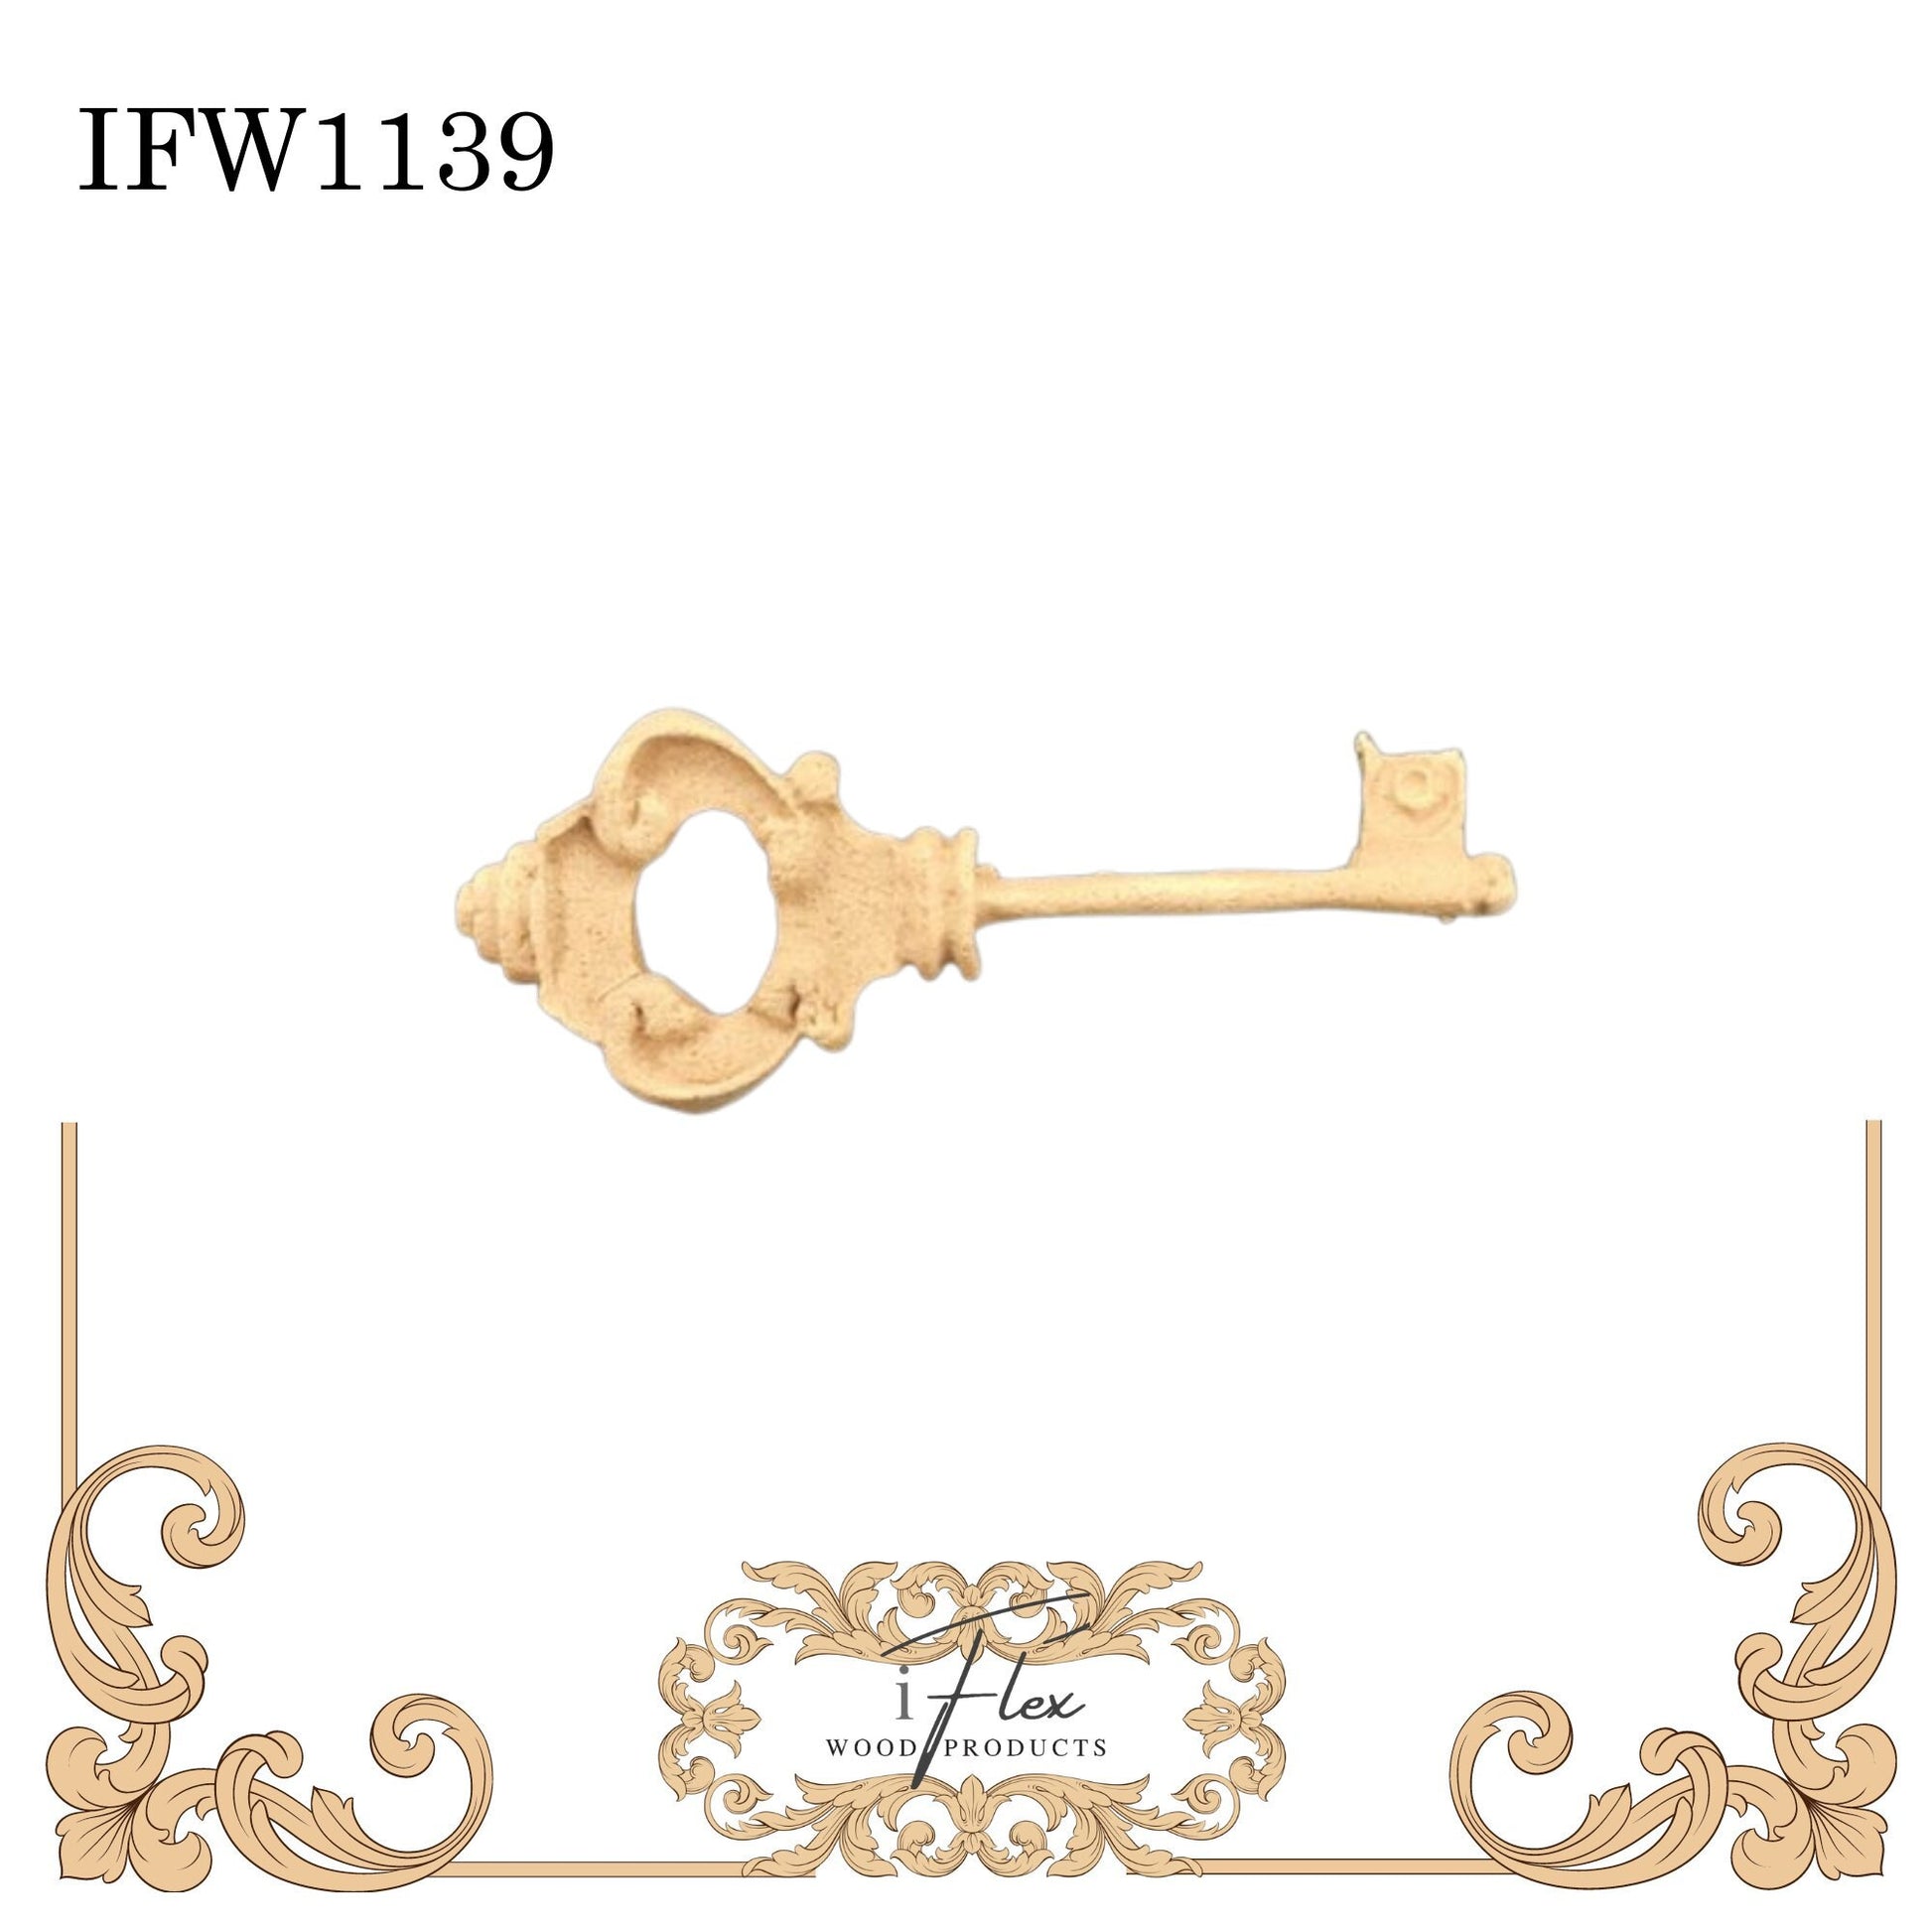 IFW 1139 iFlex Wood Products, bendable mouldings, flexible, wooden appliques, key